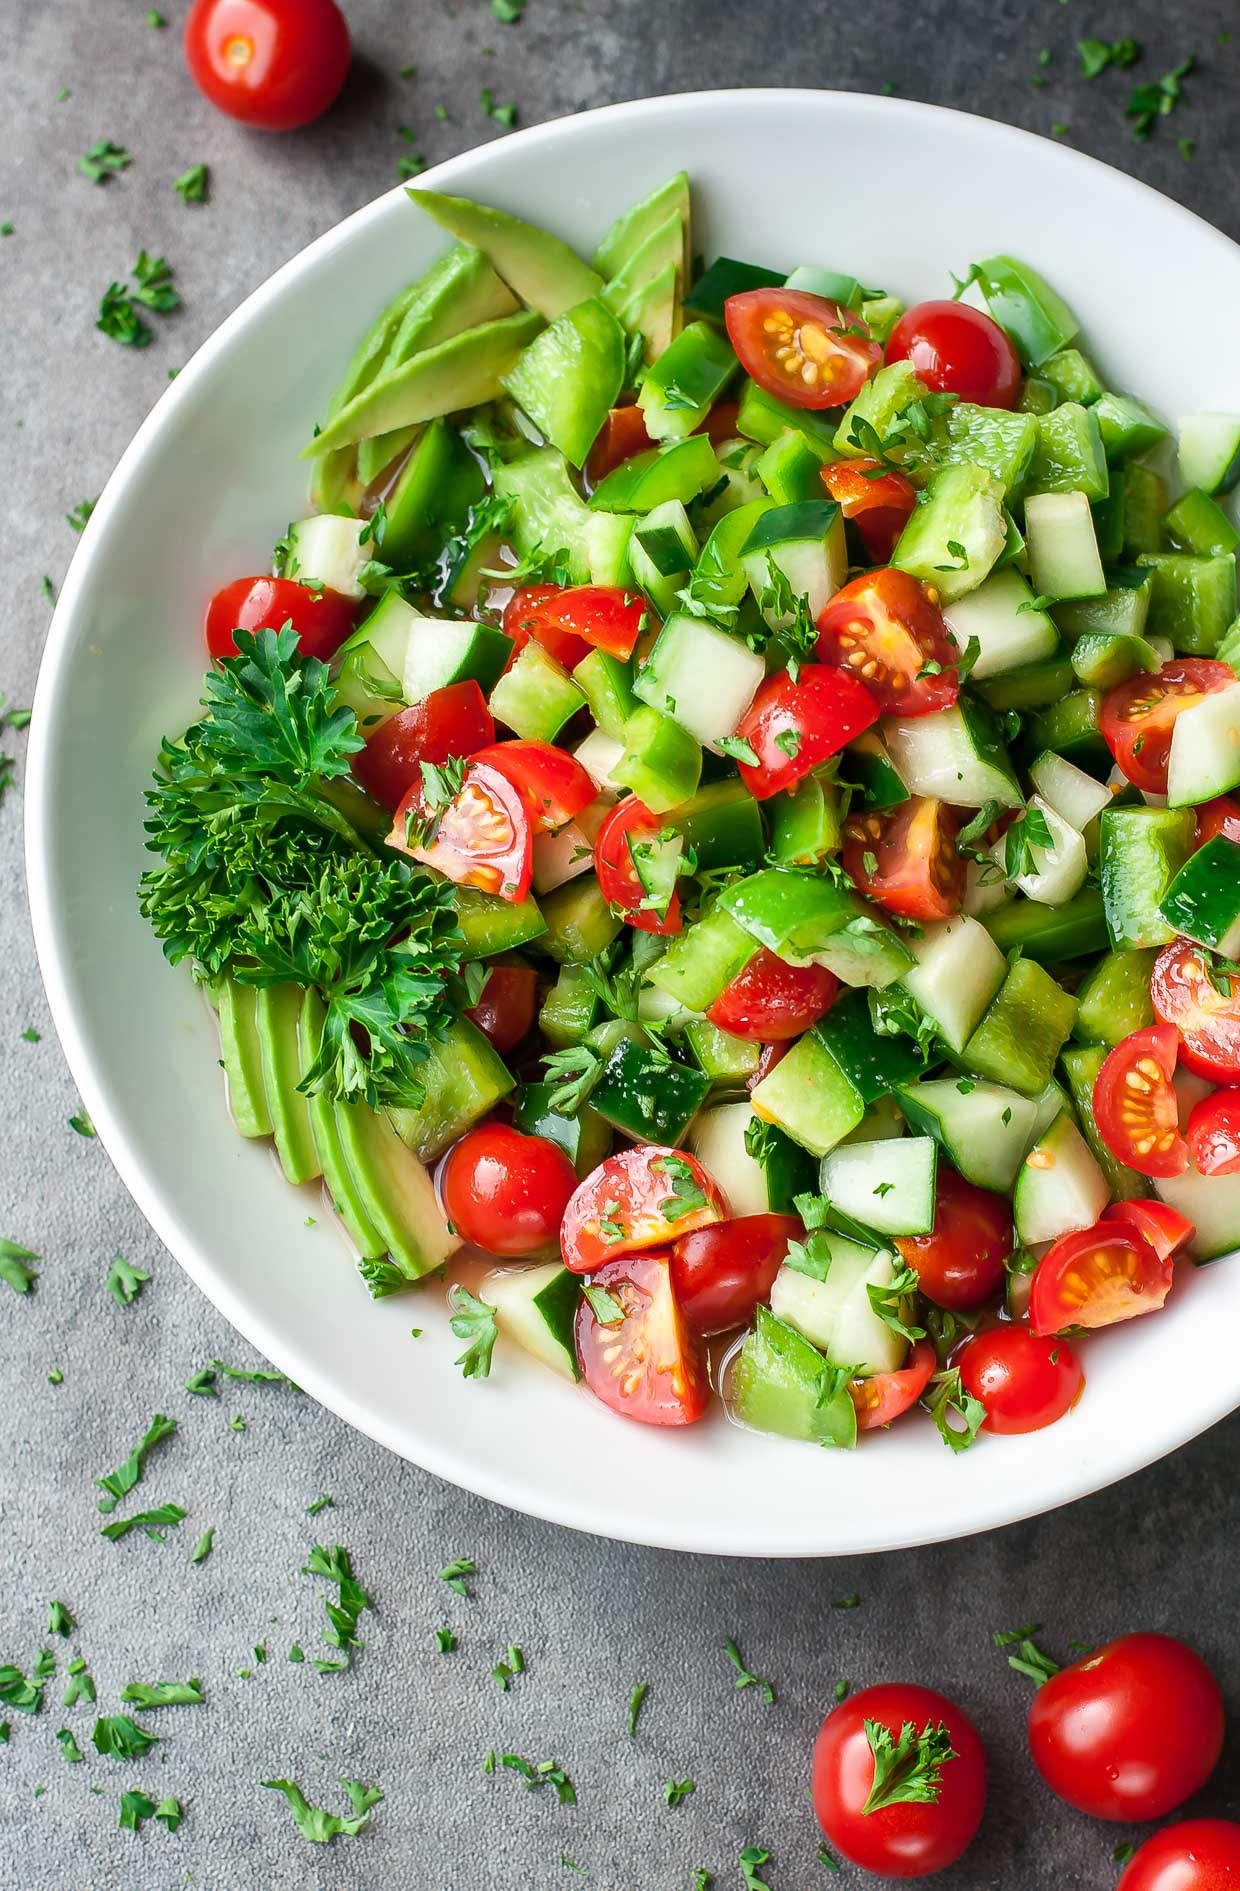 This healthy Tomato Cucumber Avocado Salad is light, fresh, and full of flavor! Vegan + Paleo + Whole30 + Low-Carb + Gluten-Free